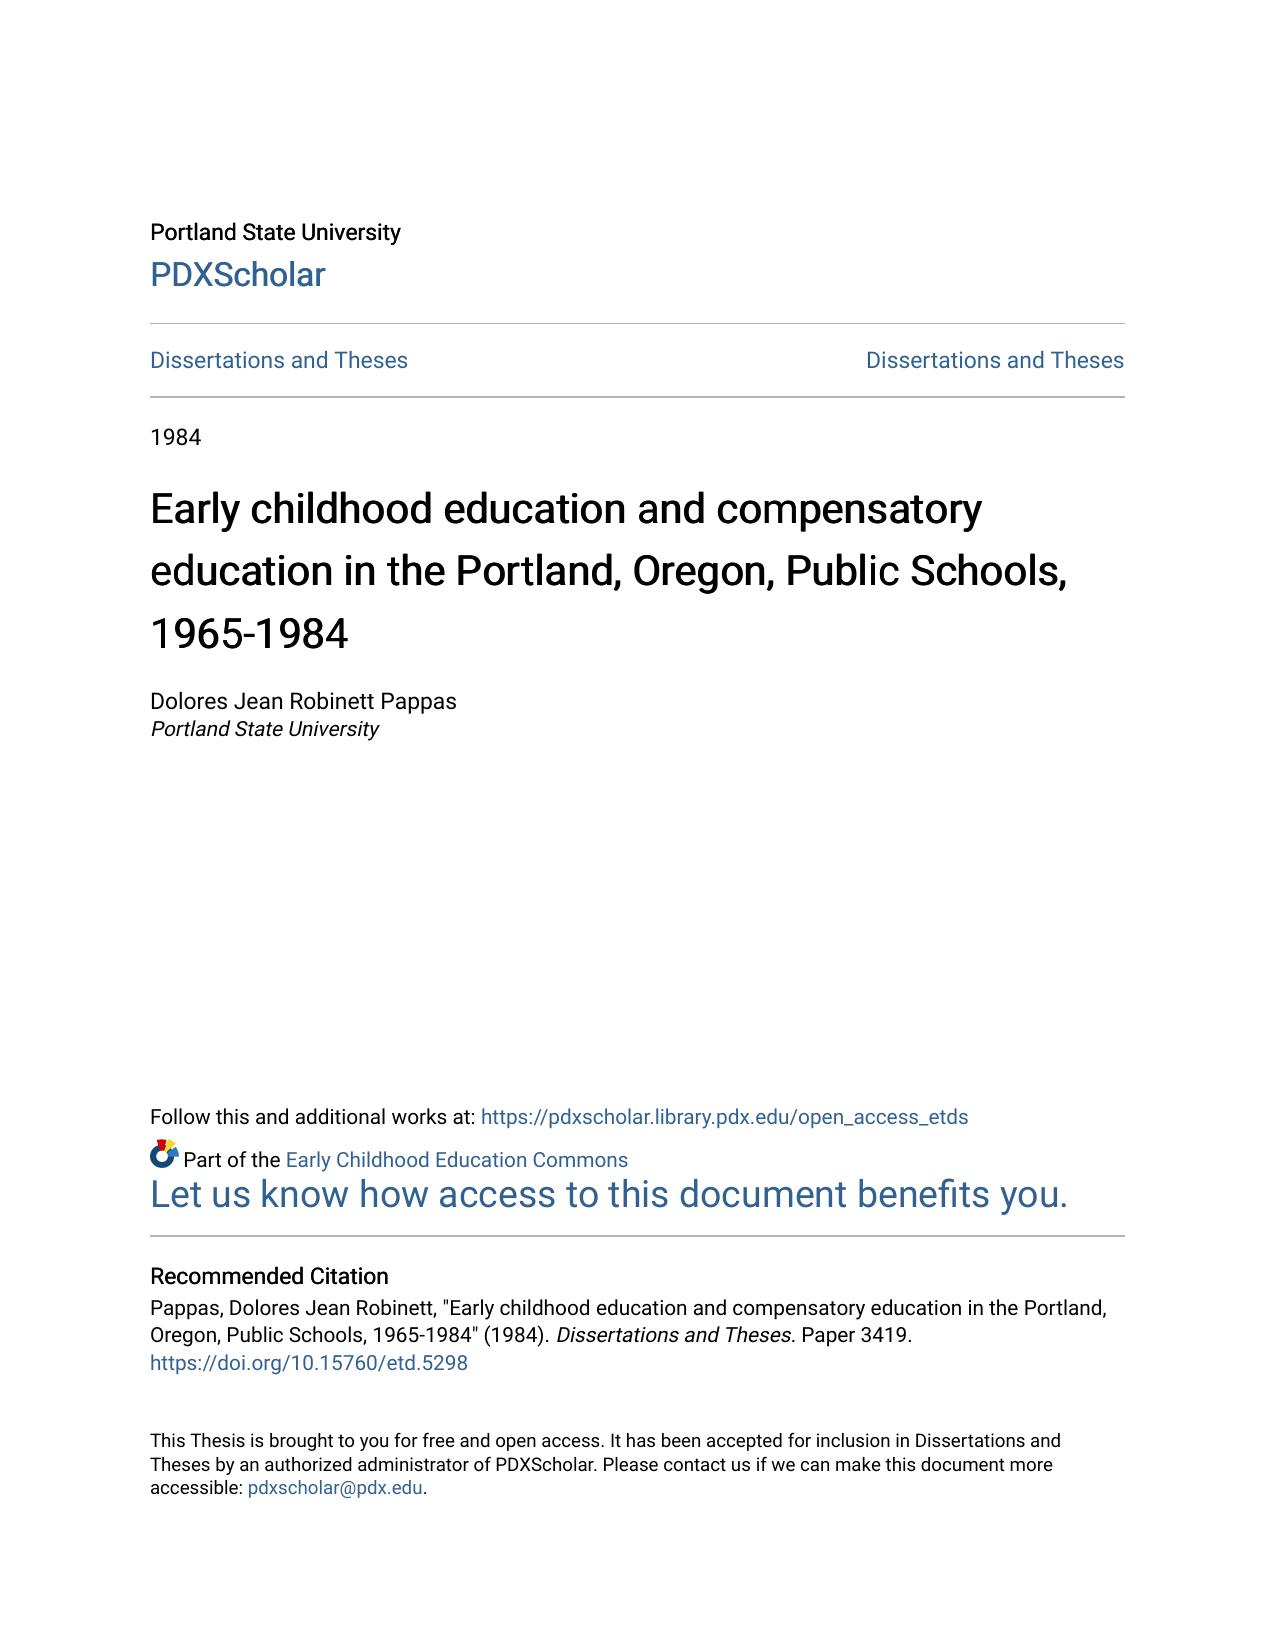 Early childhood education and compensatory education in the Portland, Oregon, Public Schools, 1965-1984